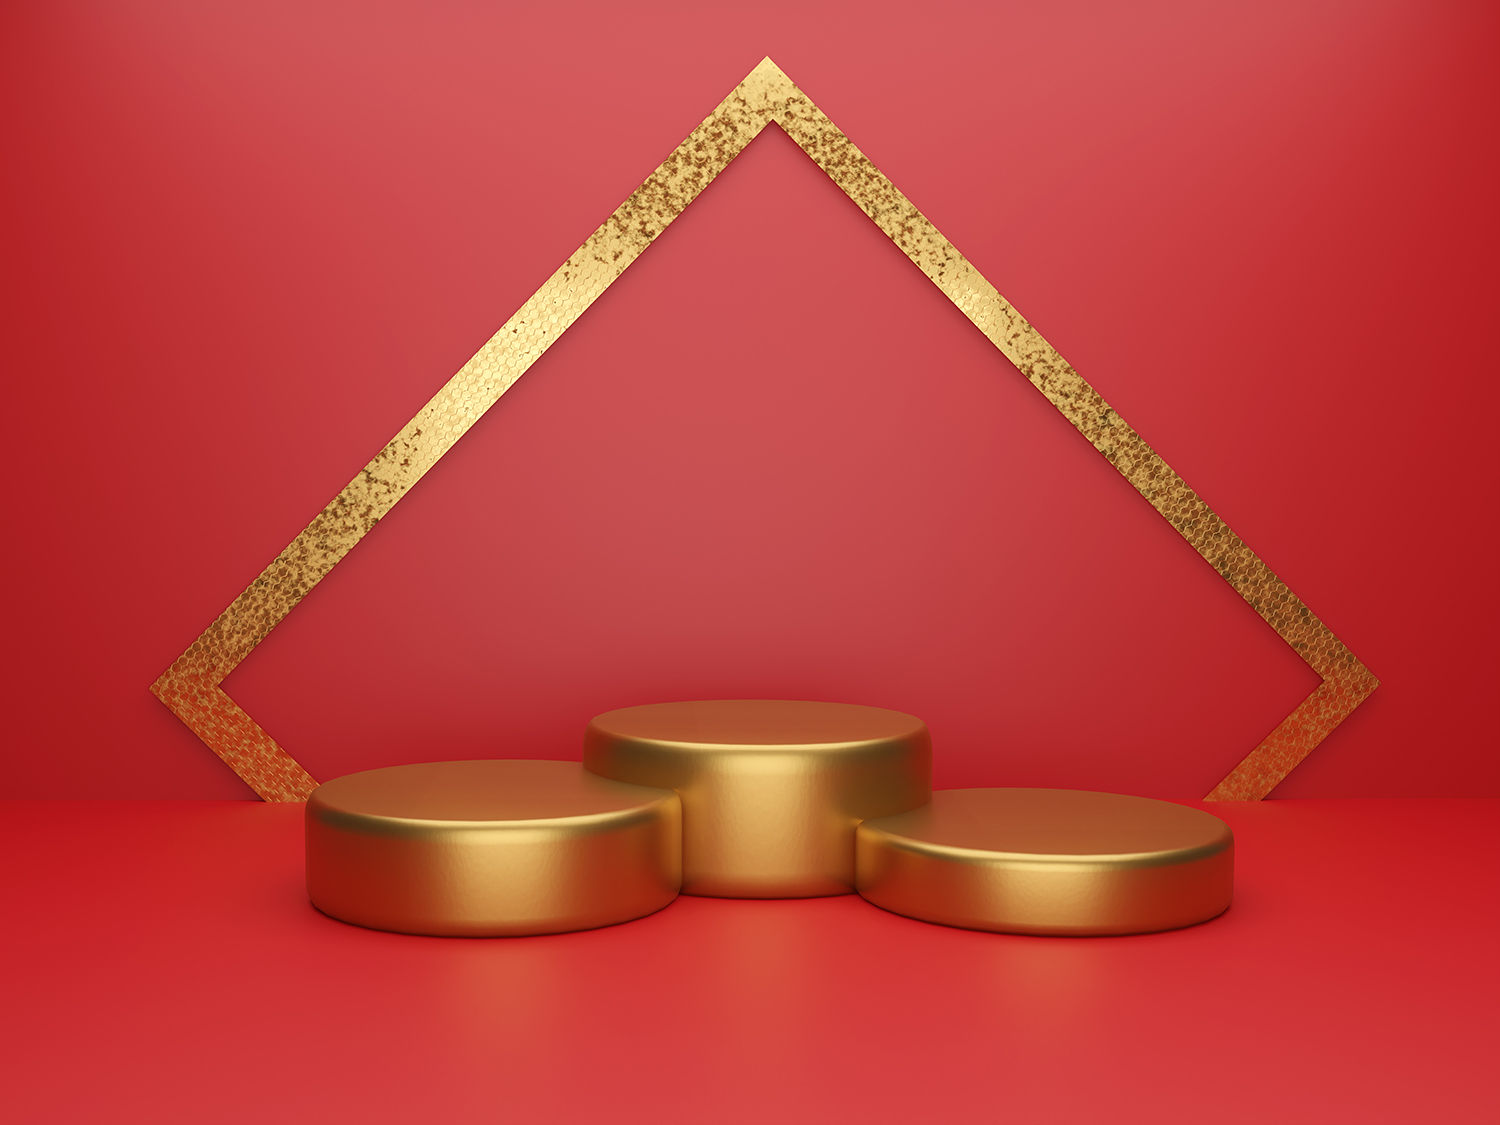 14 Product Display Podium Backgrounds, three podiums on triangle golden backgrounds.